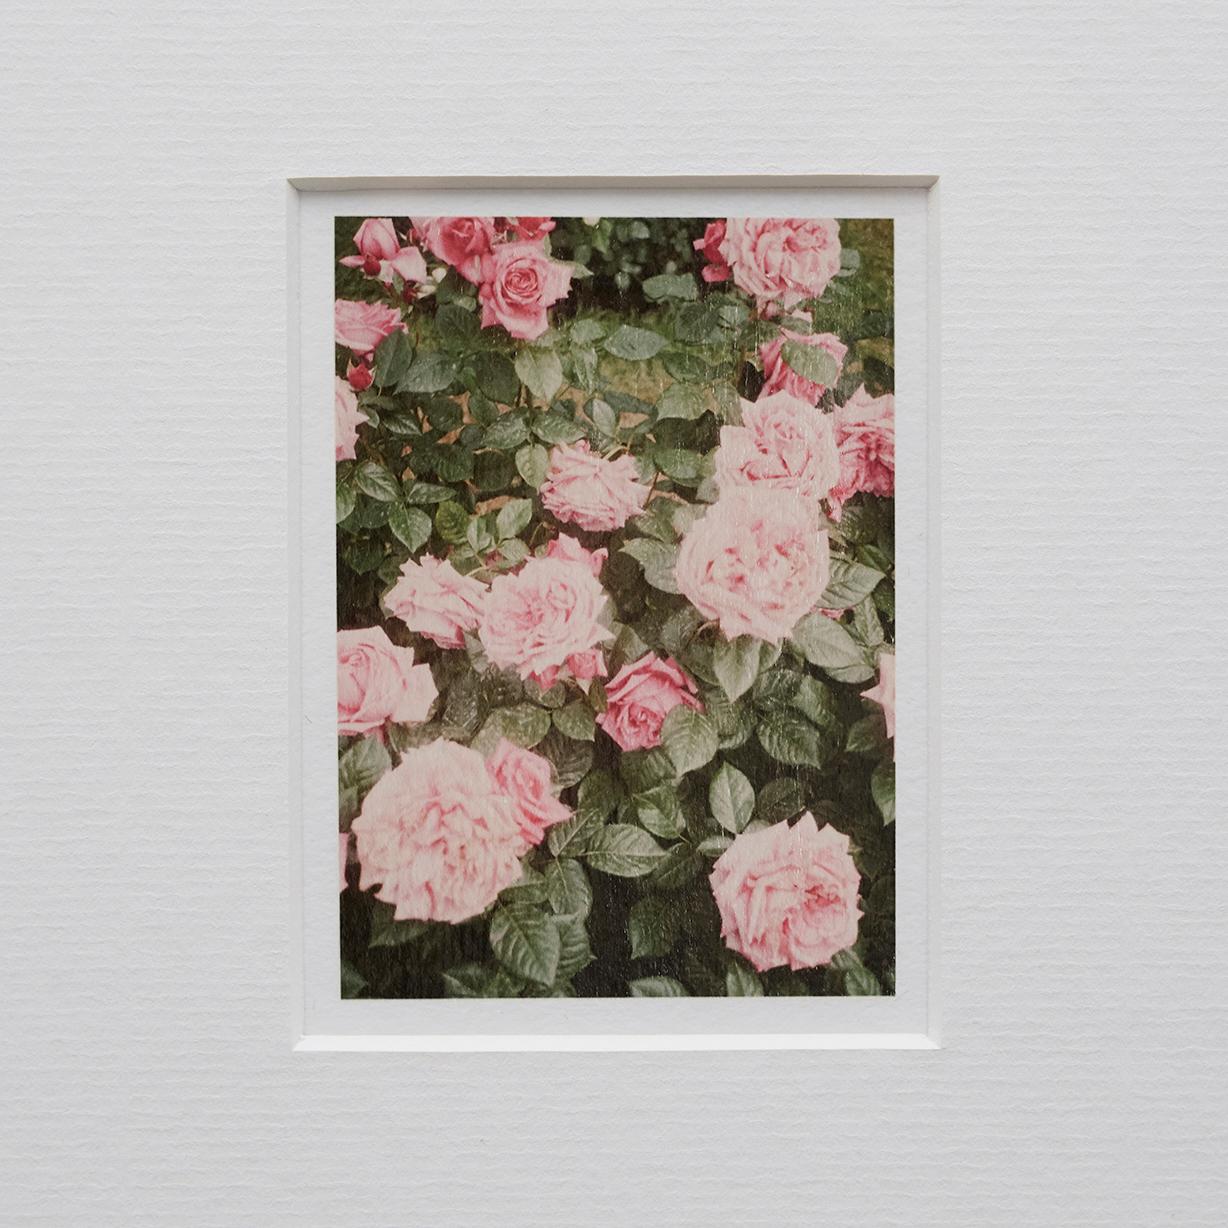 Set of nine flora photography by David Urbano made in Barcelona, circa 2017.

Giclée print in Hahnemüler Paper with a varnish layer applied by hand.

Framed, signed, stamped and numbered.

Edition of 9.

Year 2015 printed 2018.

Measures: